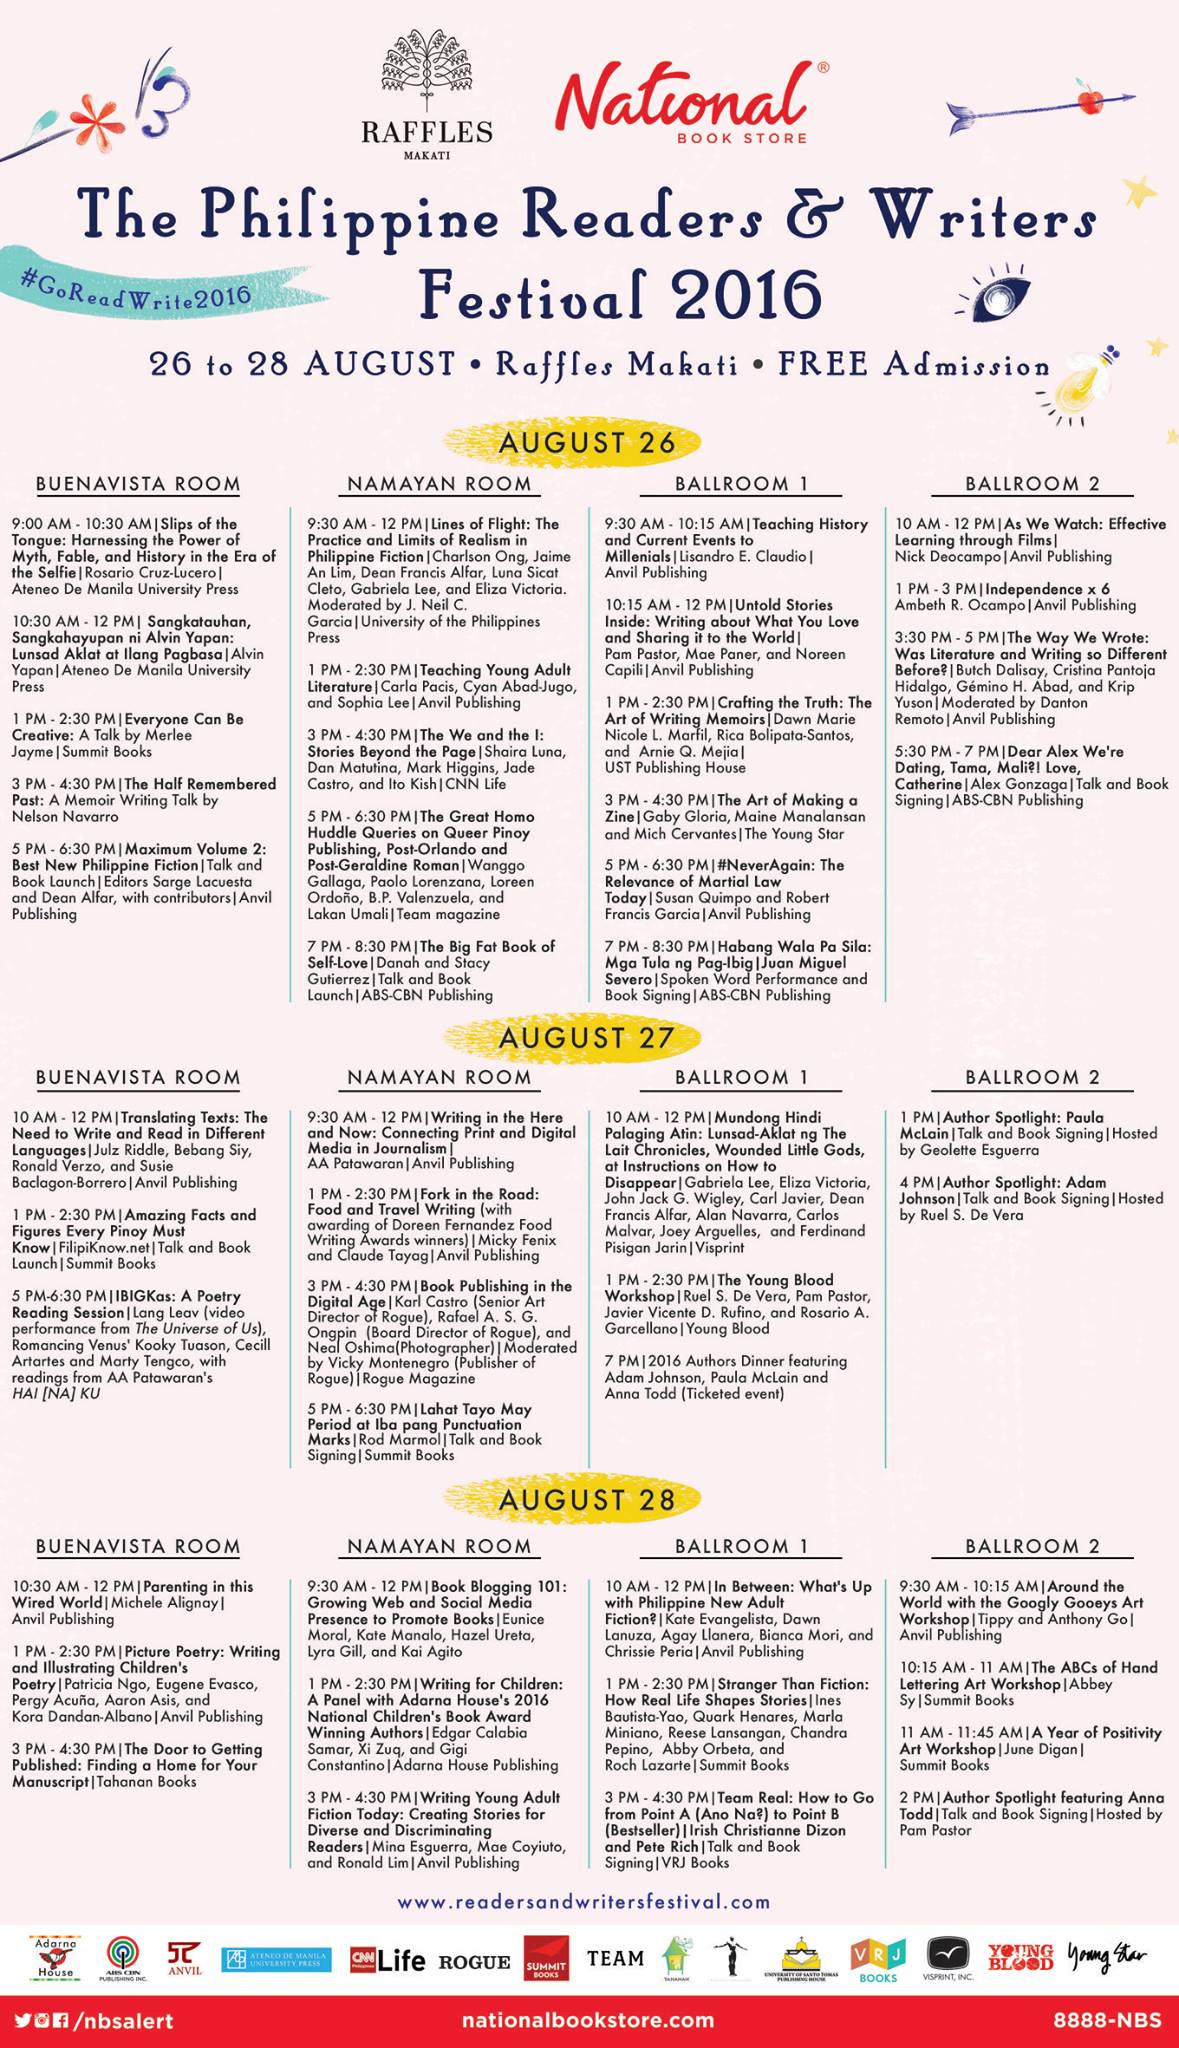 The Philippine Readers and Writers Festival - Event Schedule